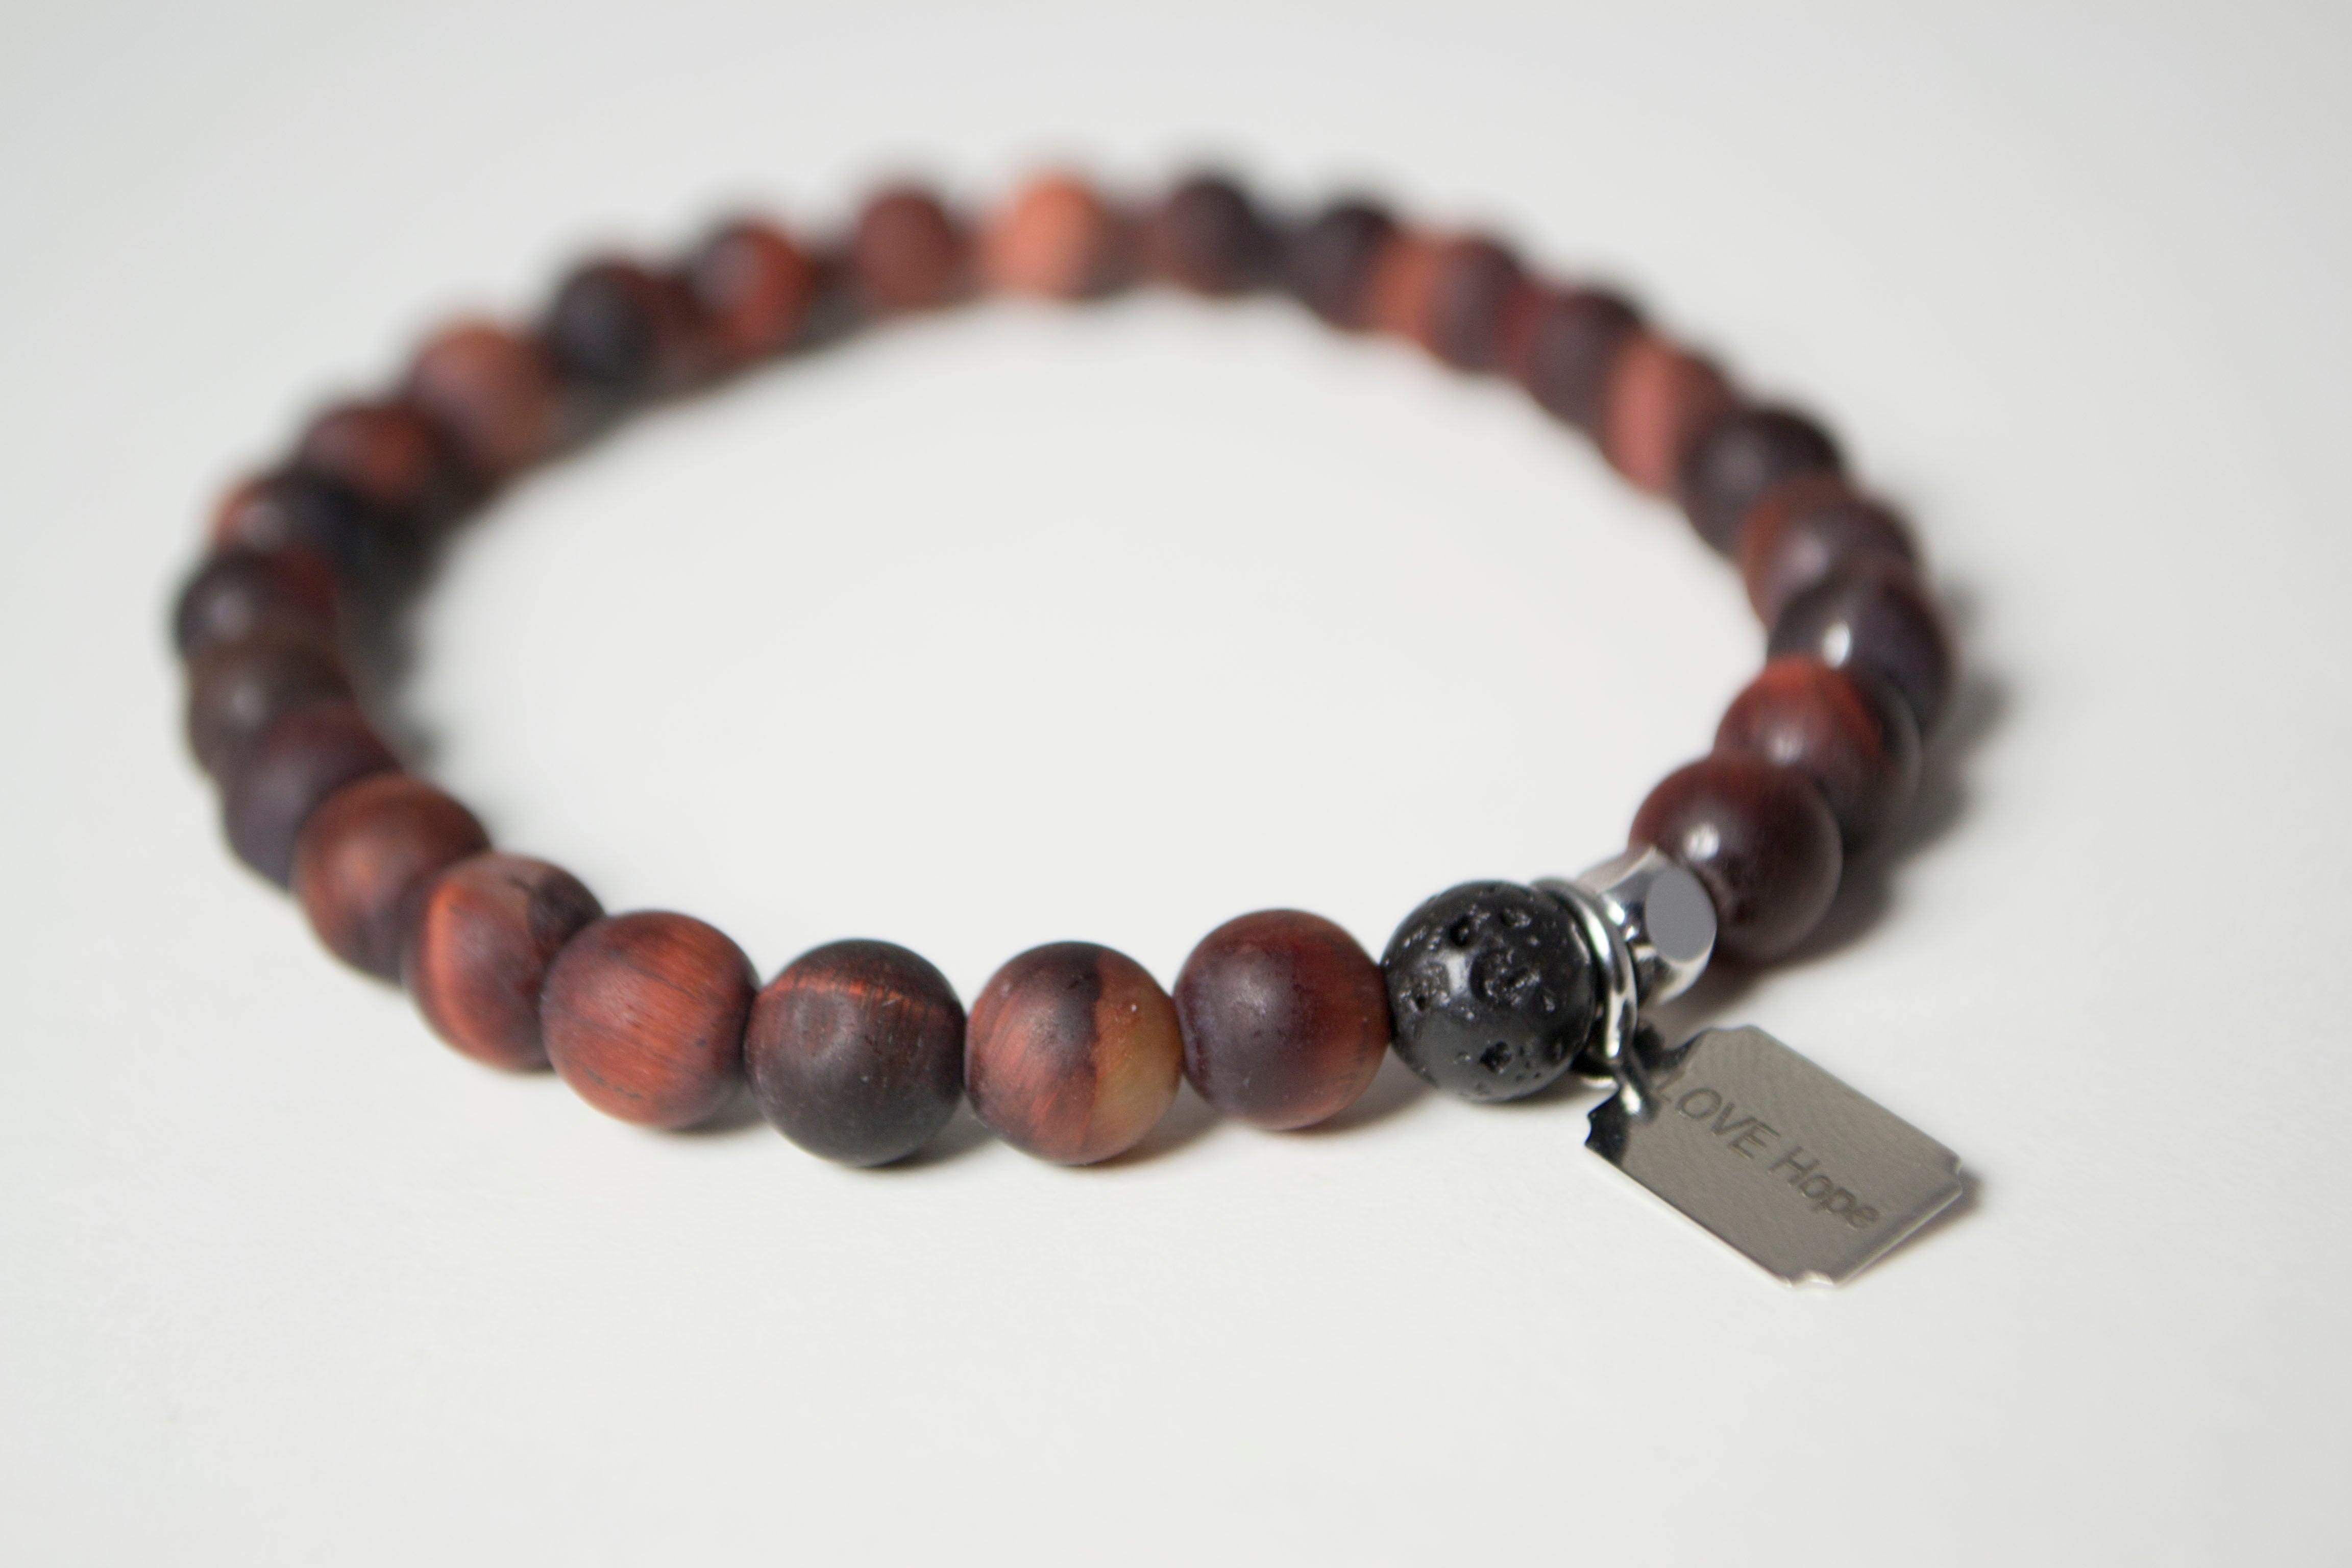 Rear view of the natural stones in the Infused Red Tiger's Eye bracelet with details of the color and texture of the infusible Lava Stone. In the background is a blurred view of the front of the bracelet